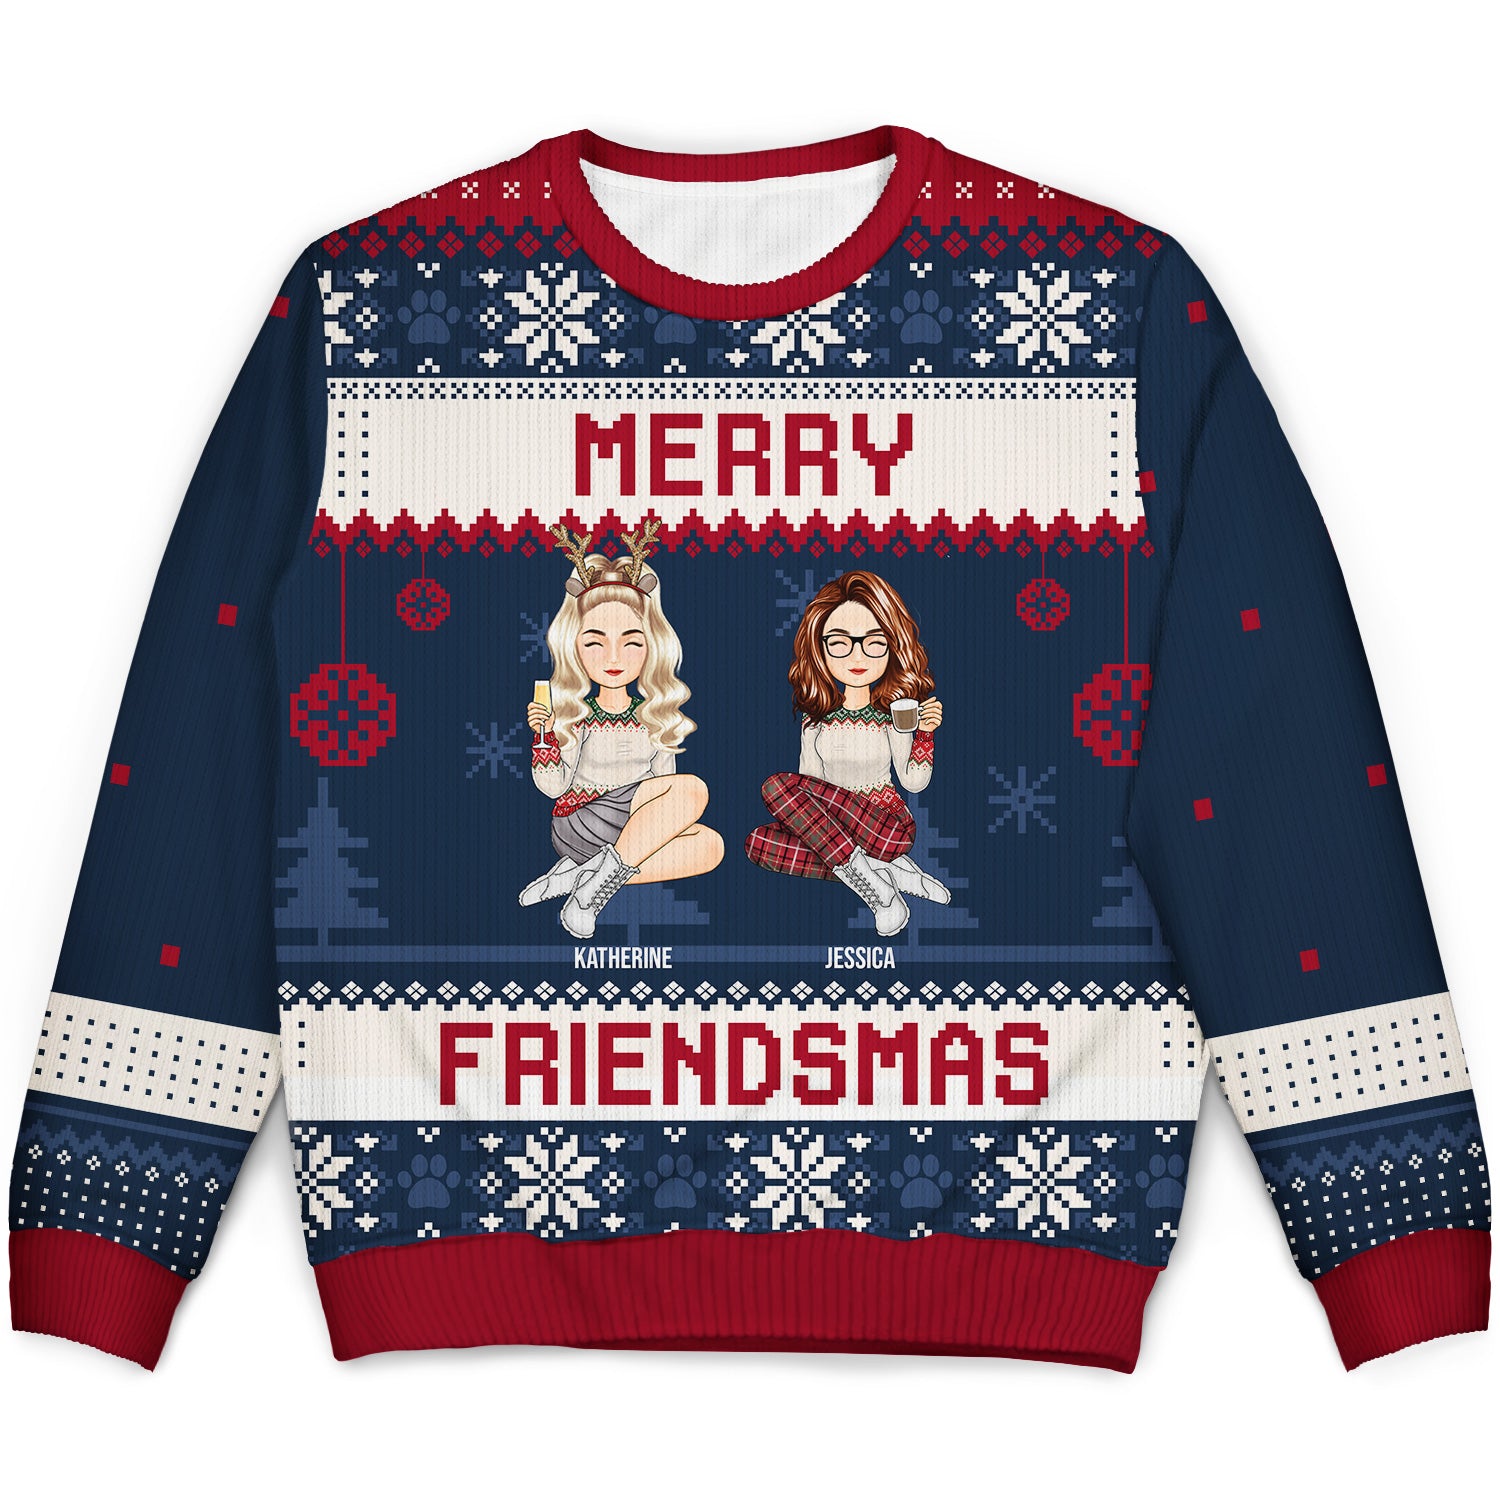 Merry Friendsmas - Christmas Gift For Besties - Personalized Unisex Ugly Sweater